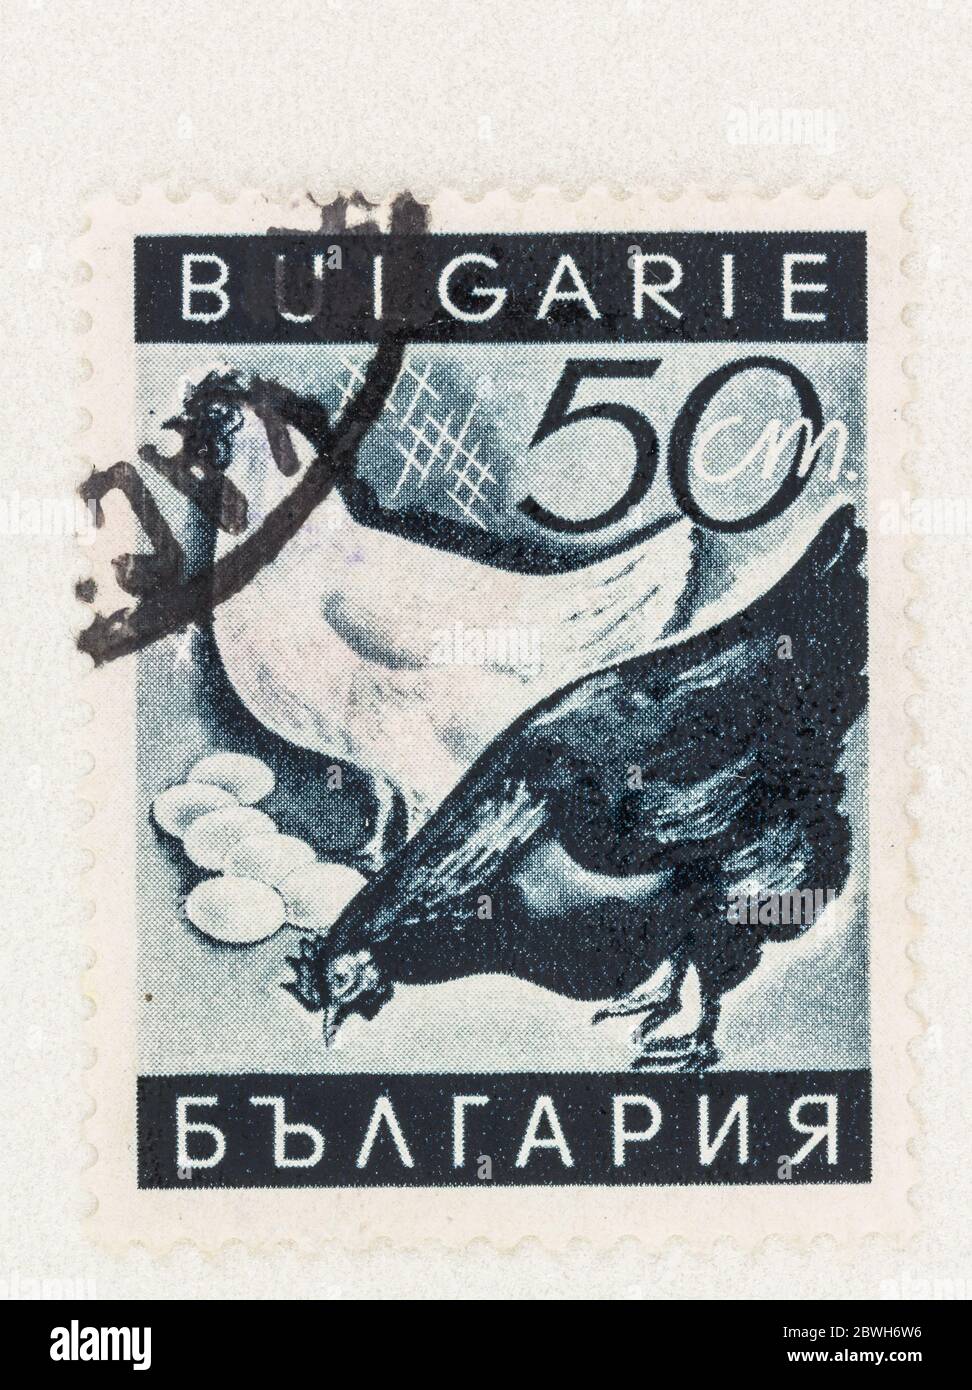 SEATTLE WASHINGTON - May 30, 2020: Chicken and eggs on Bulgaria postage stamp of Scott # 323 Stock Photo